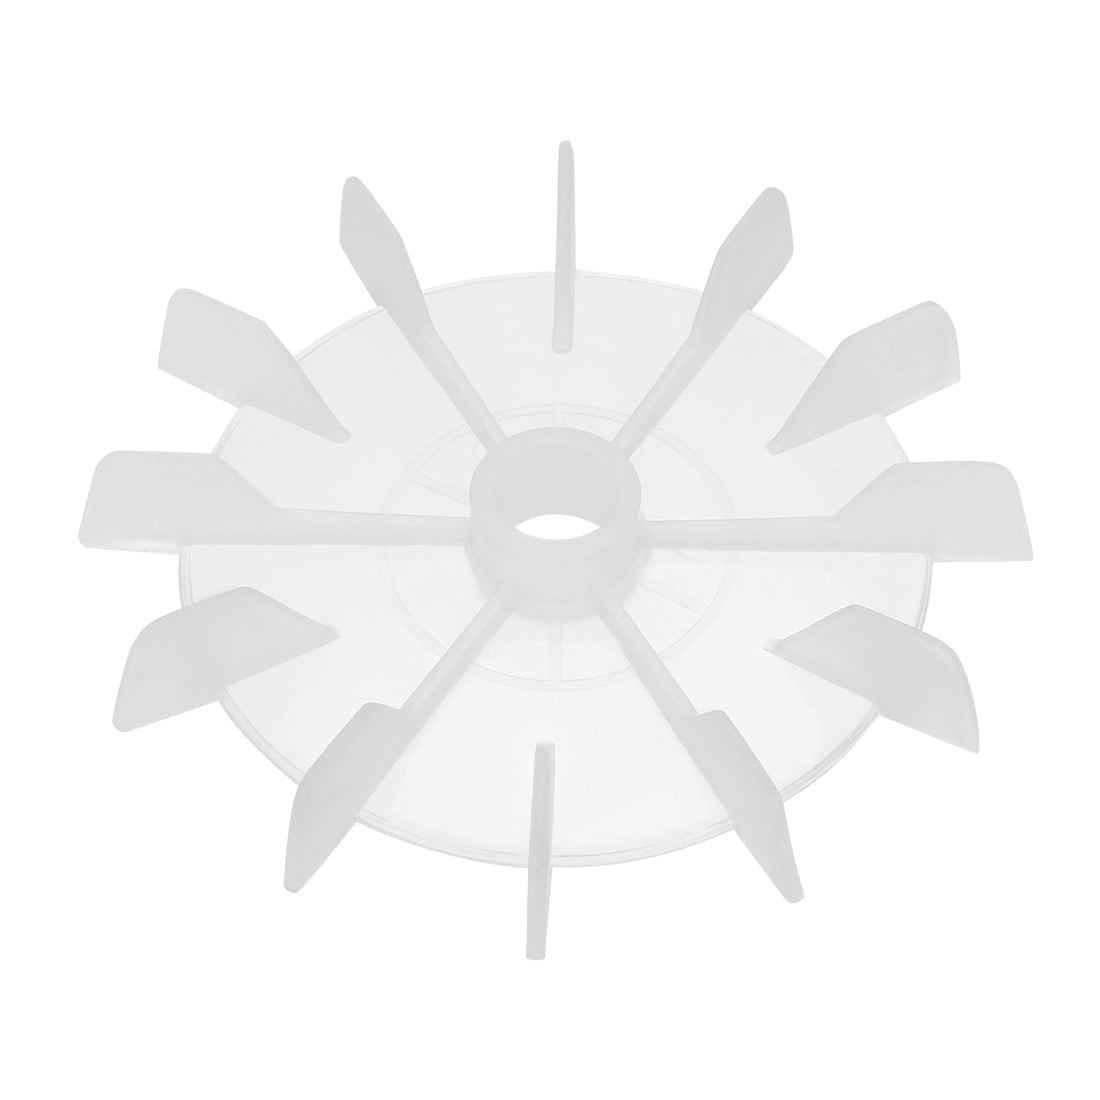 uxcell Uxcell 1Pcs 120*15mm Round Shaft Replacement White Plastic 12 Impeller Motor Fan Vane